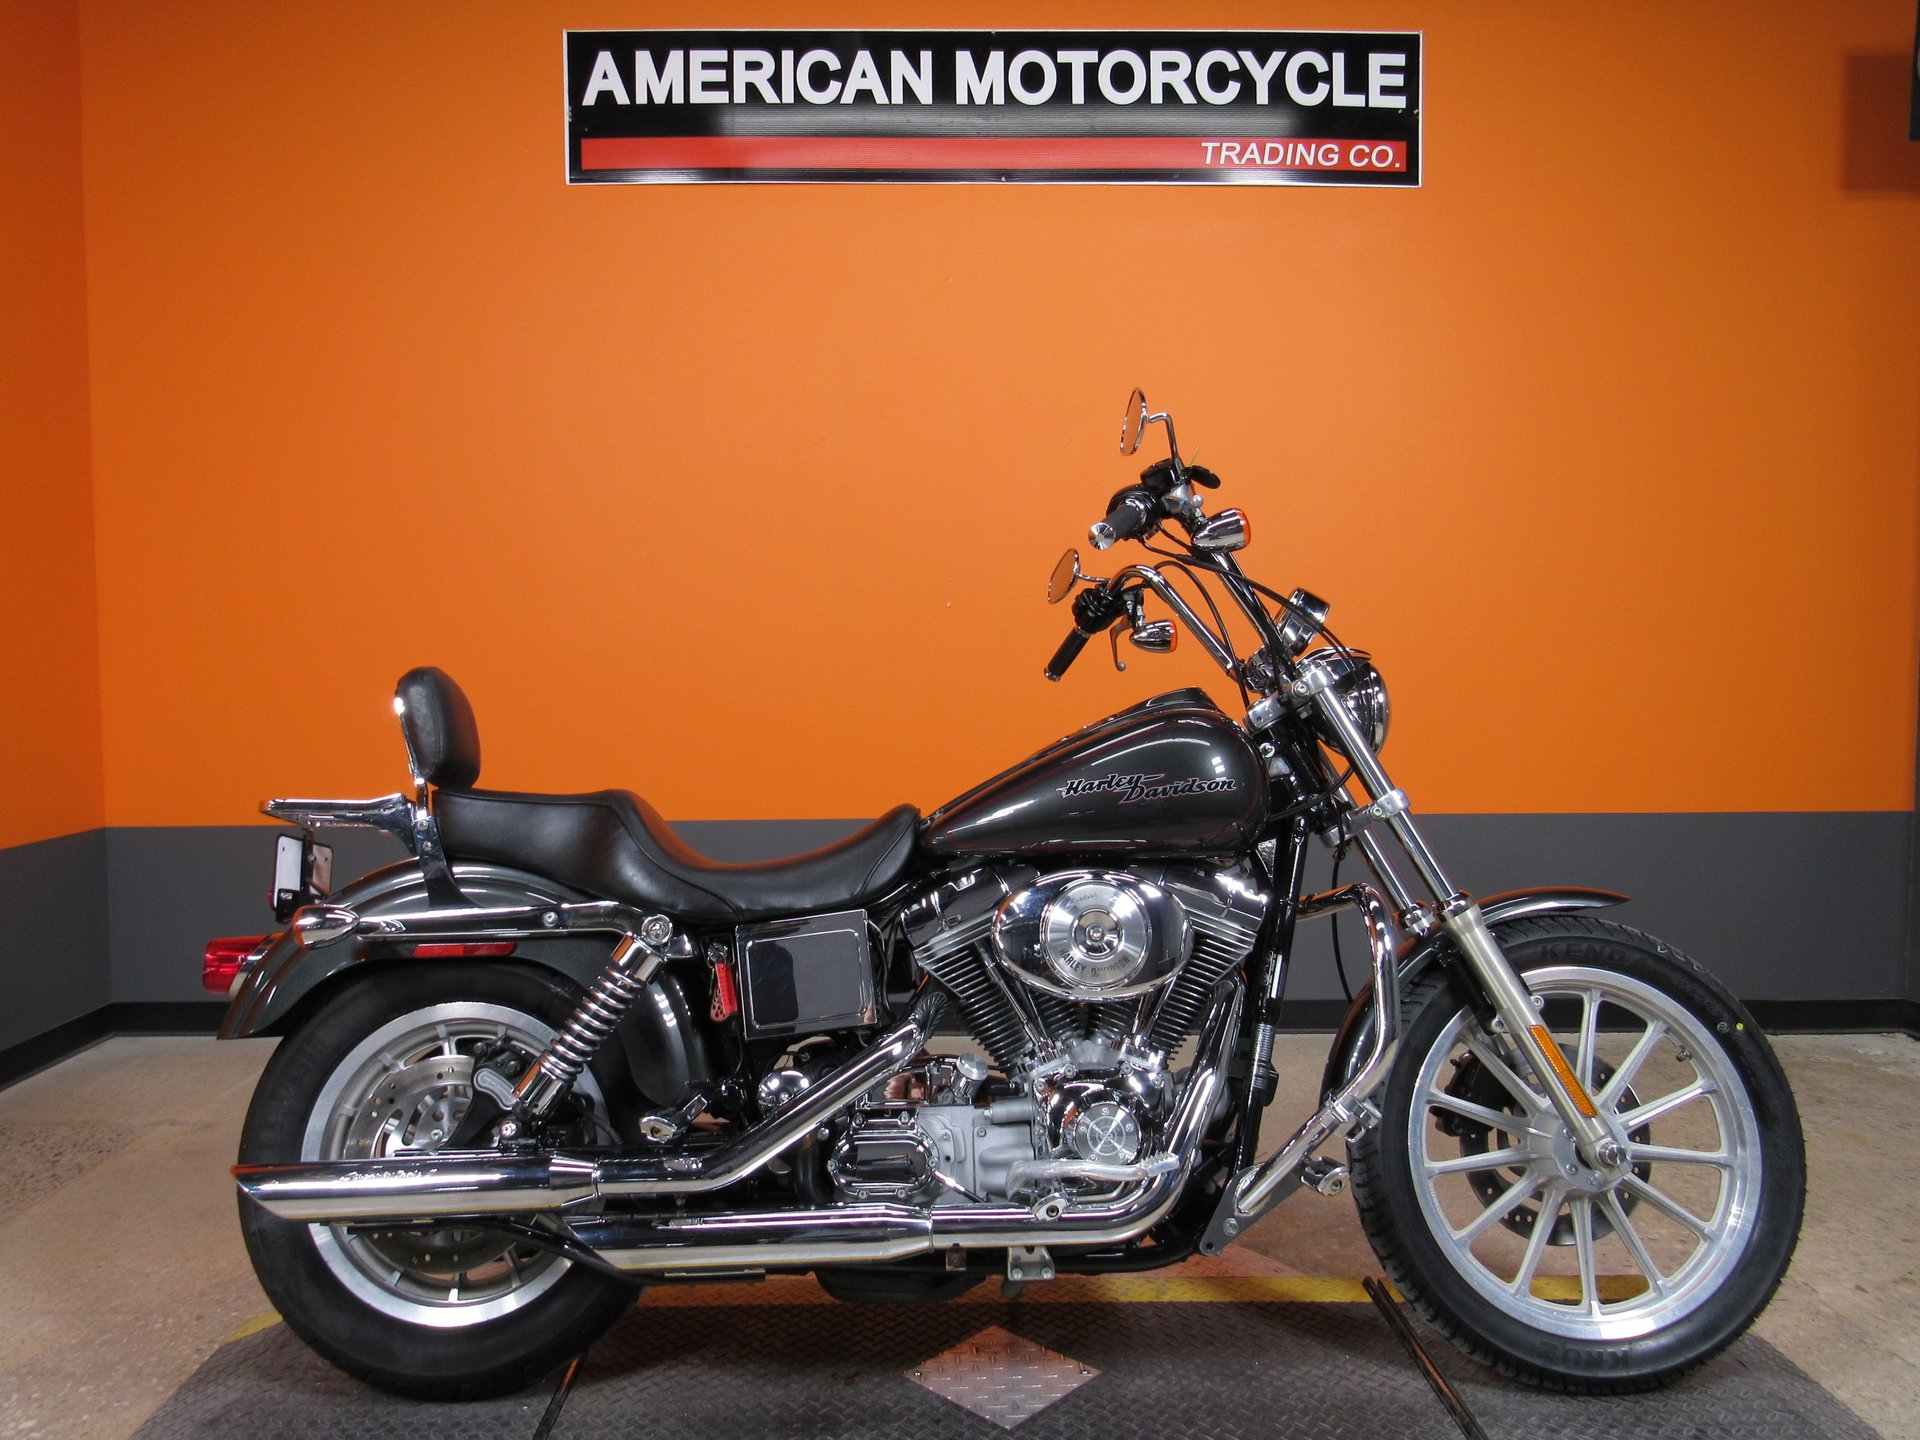 2005 Harley Davidson Dyna Super Glide American Motorcycle Trading Company Used Harley Davidson Motorcycles